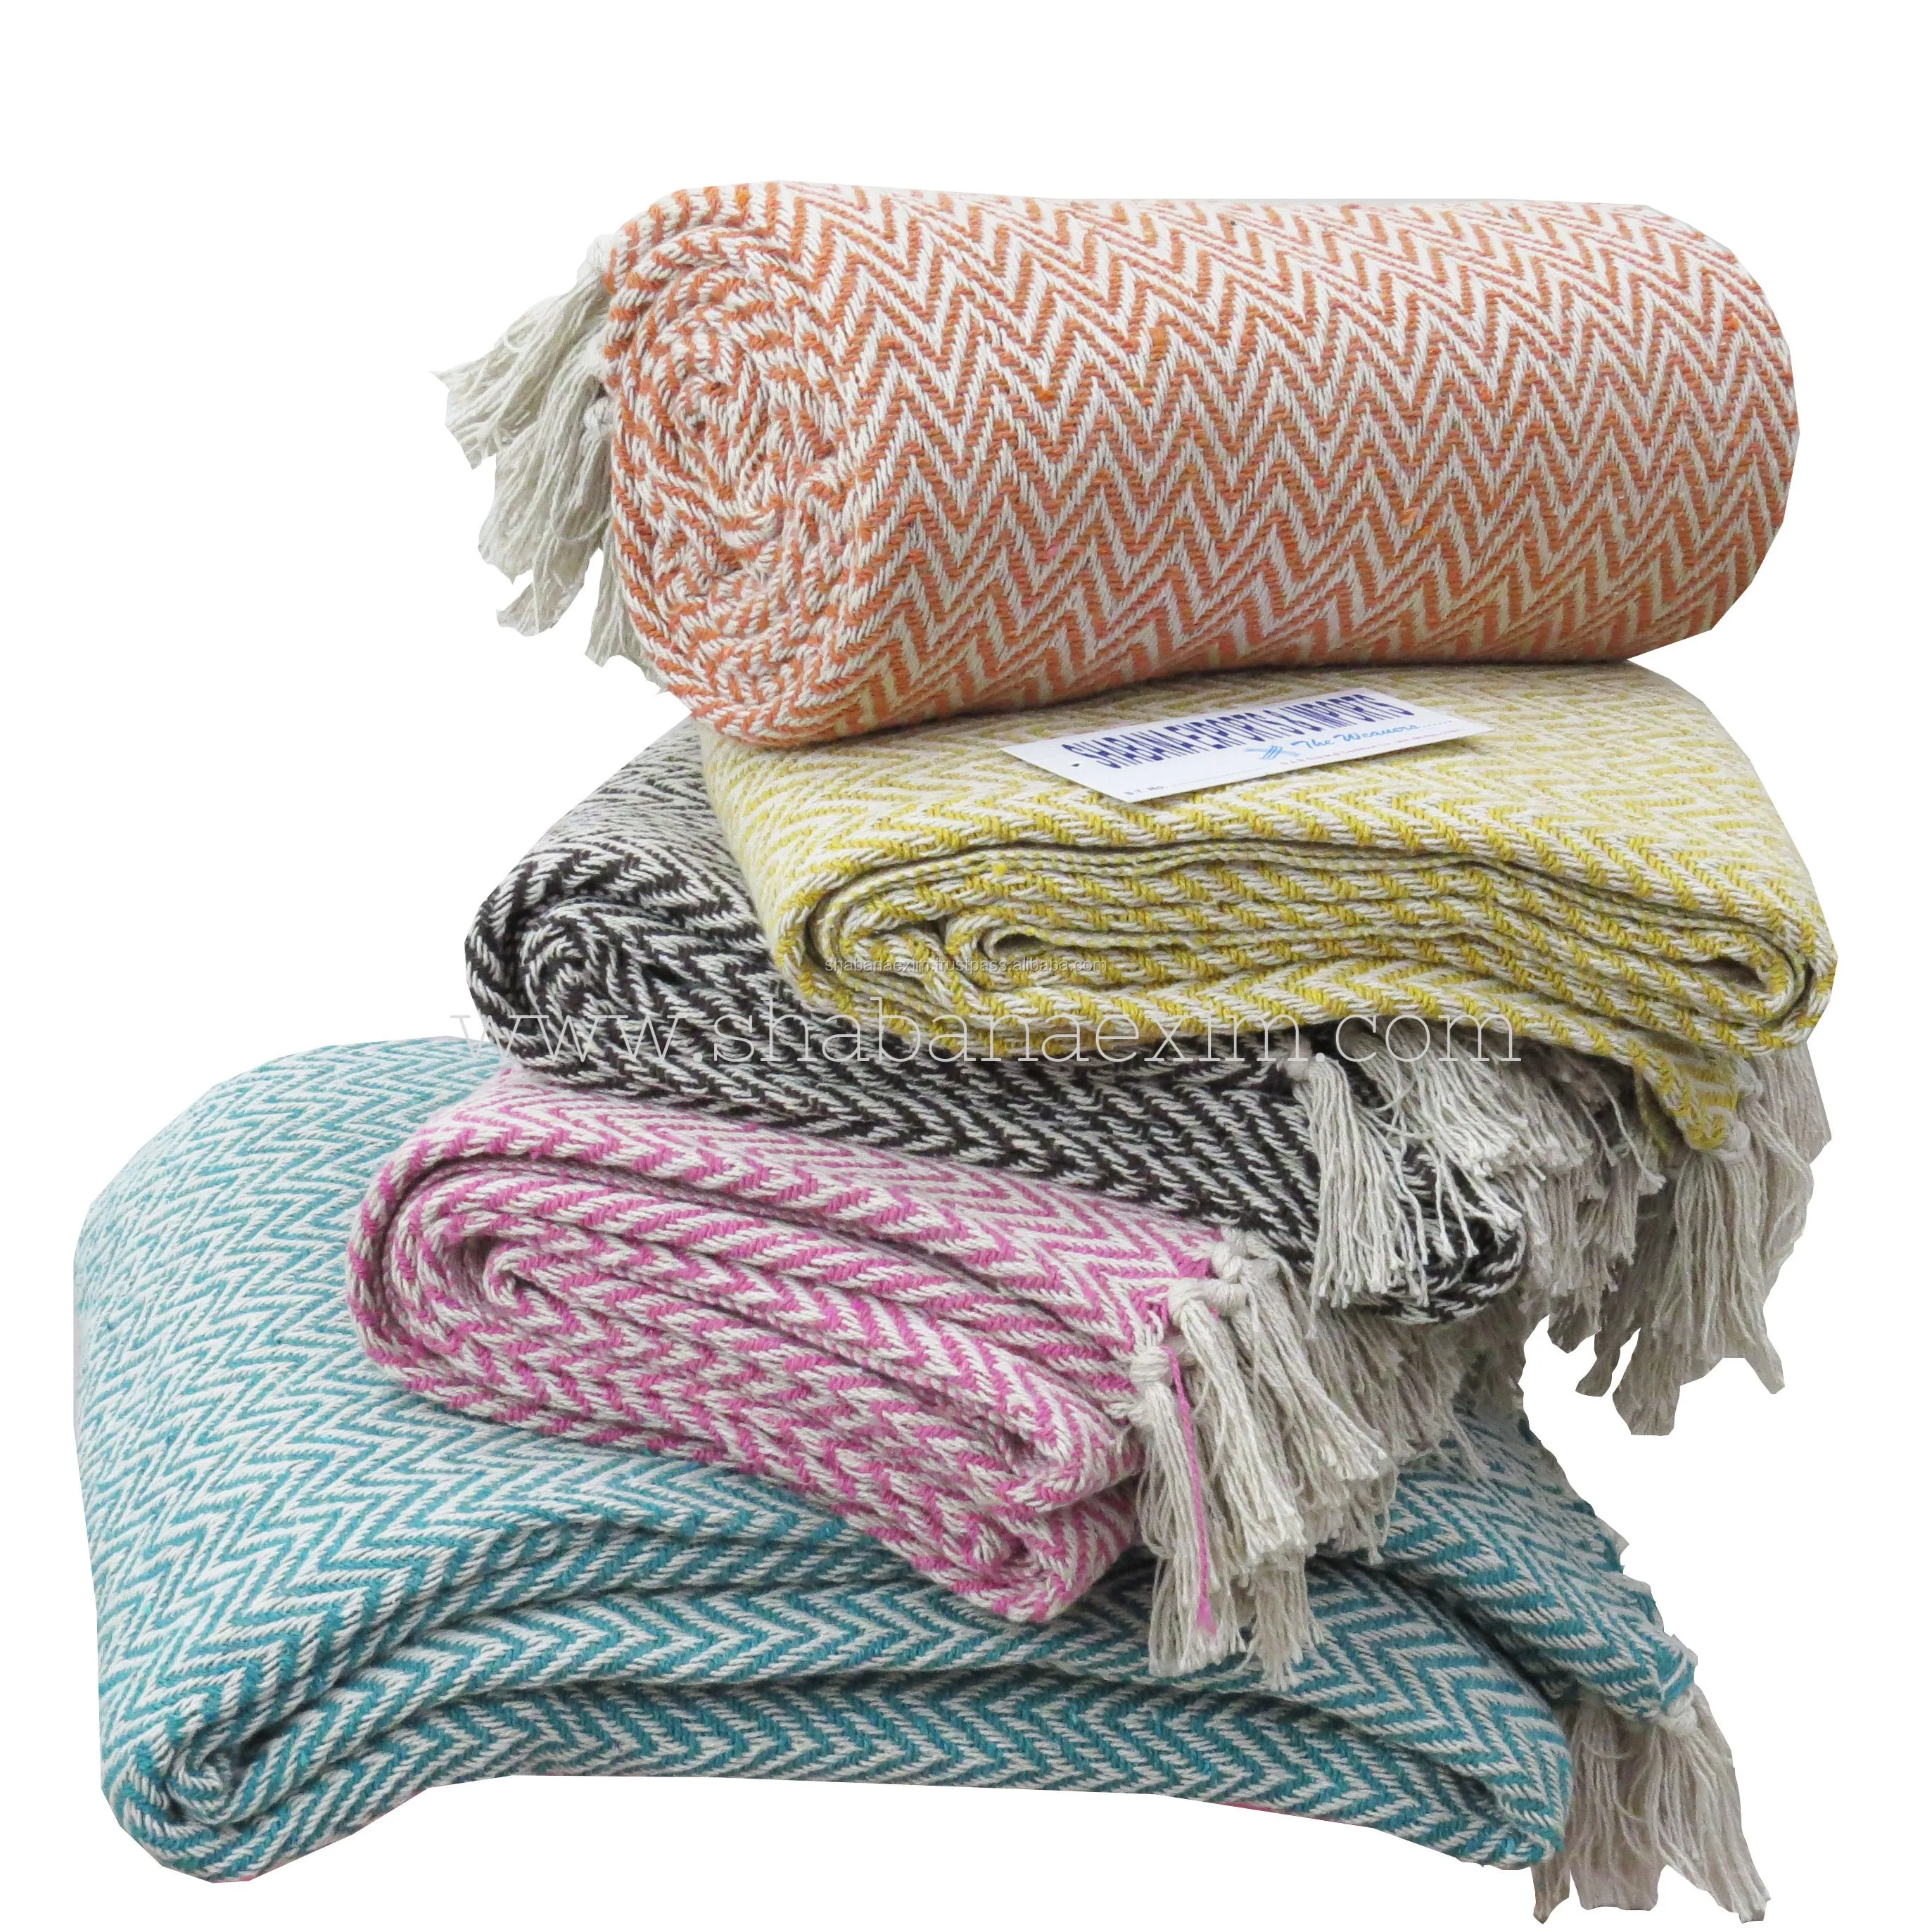 Zigzag Textured Weave Cotton Blankets Large Woven Throws - Buy Indian ...